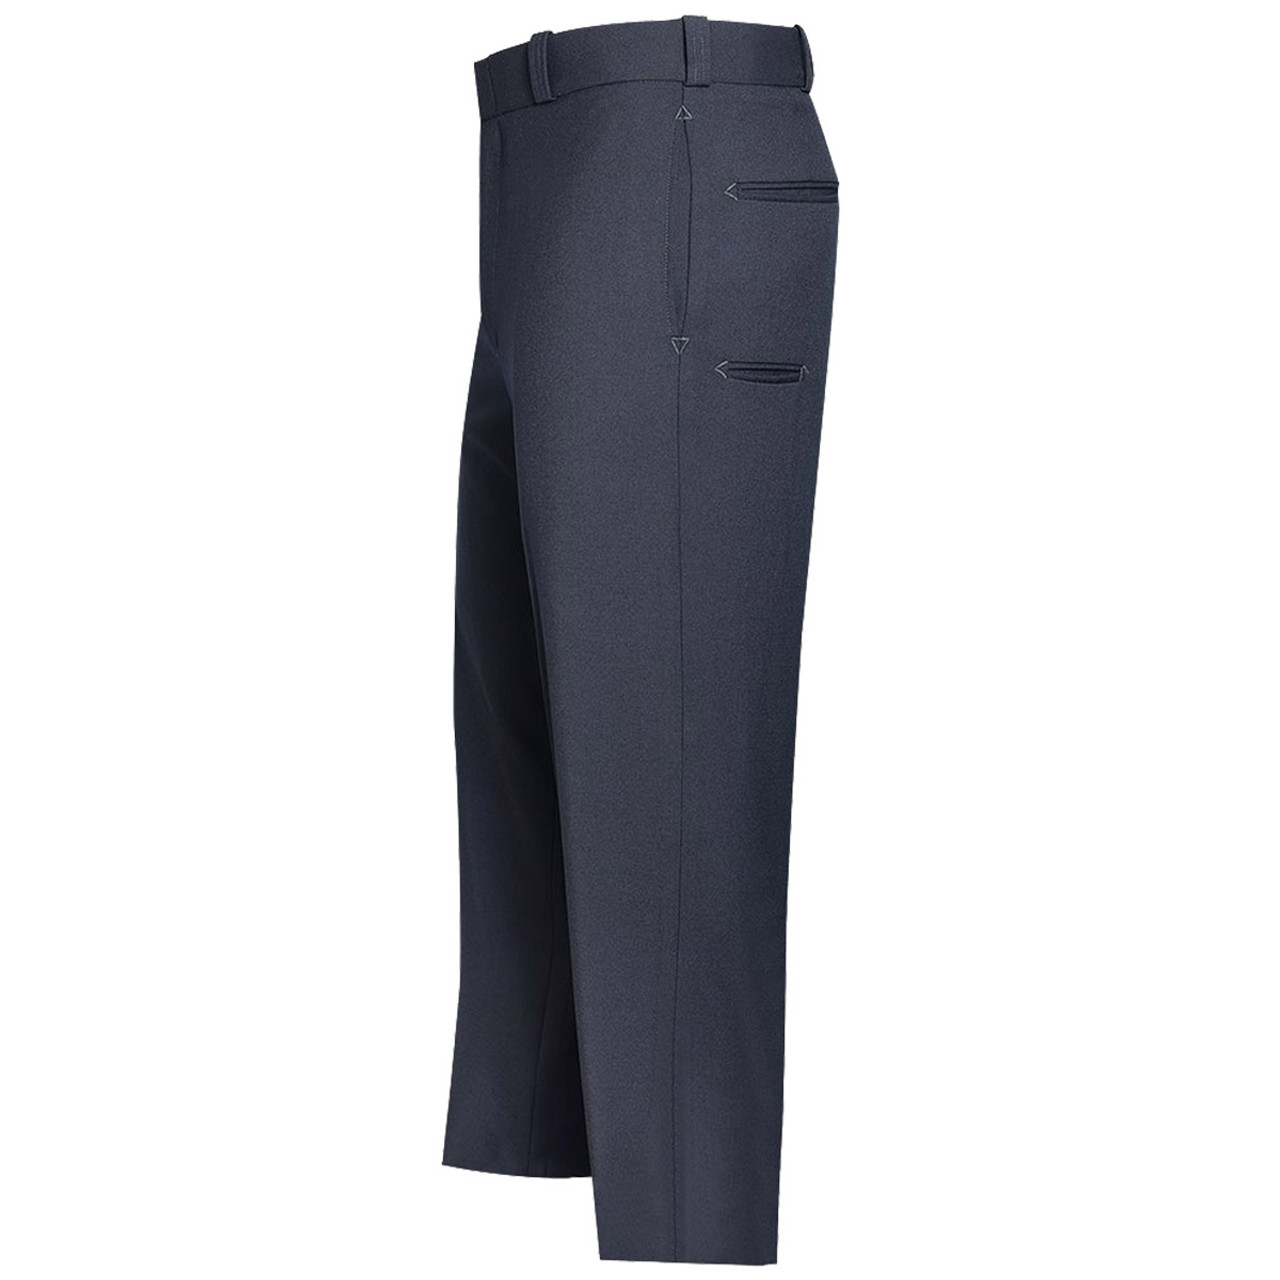 MANZINI Men 100% Wool Classic Fit Flat Front Dress Pants - Made In Italy -  Boytique %